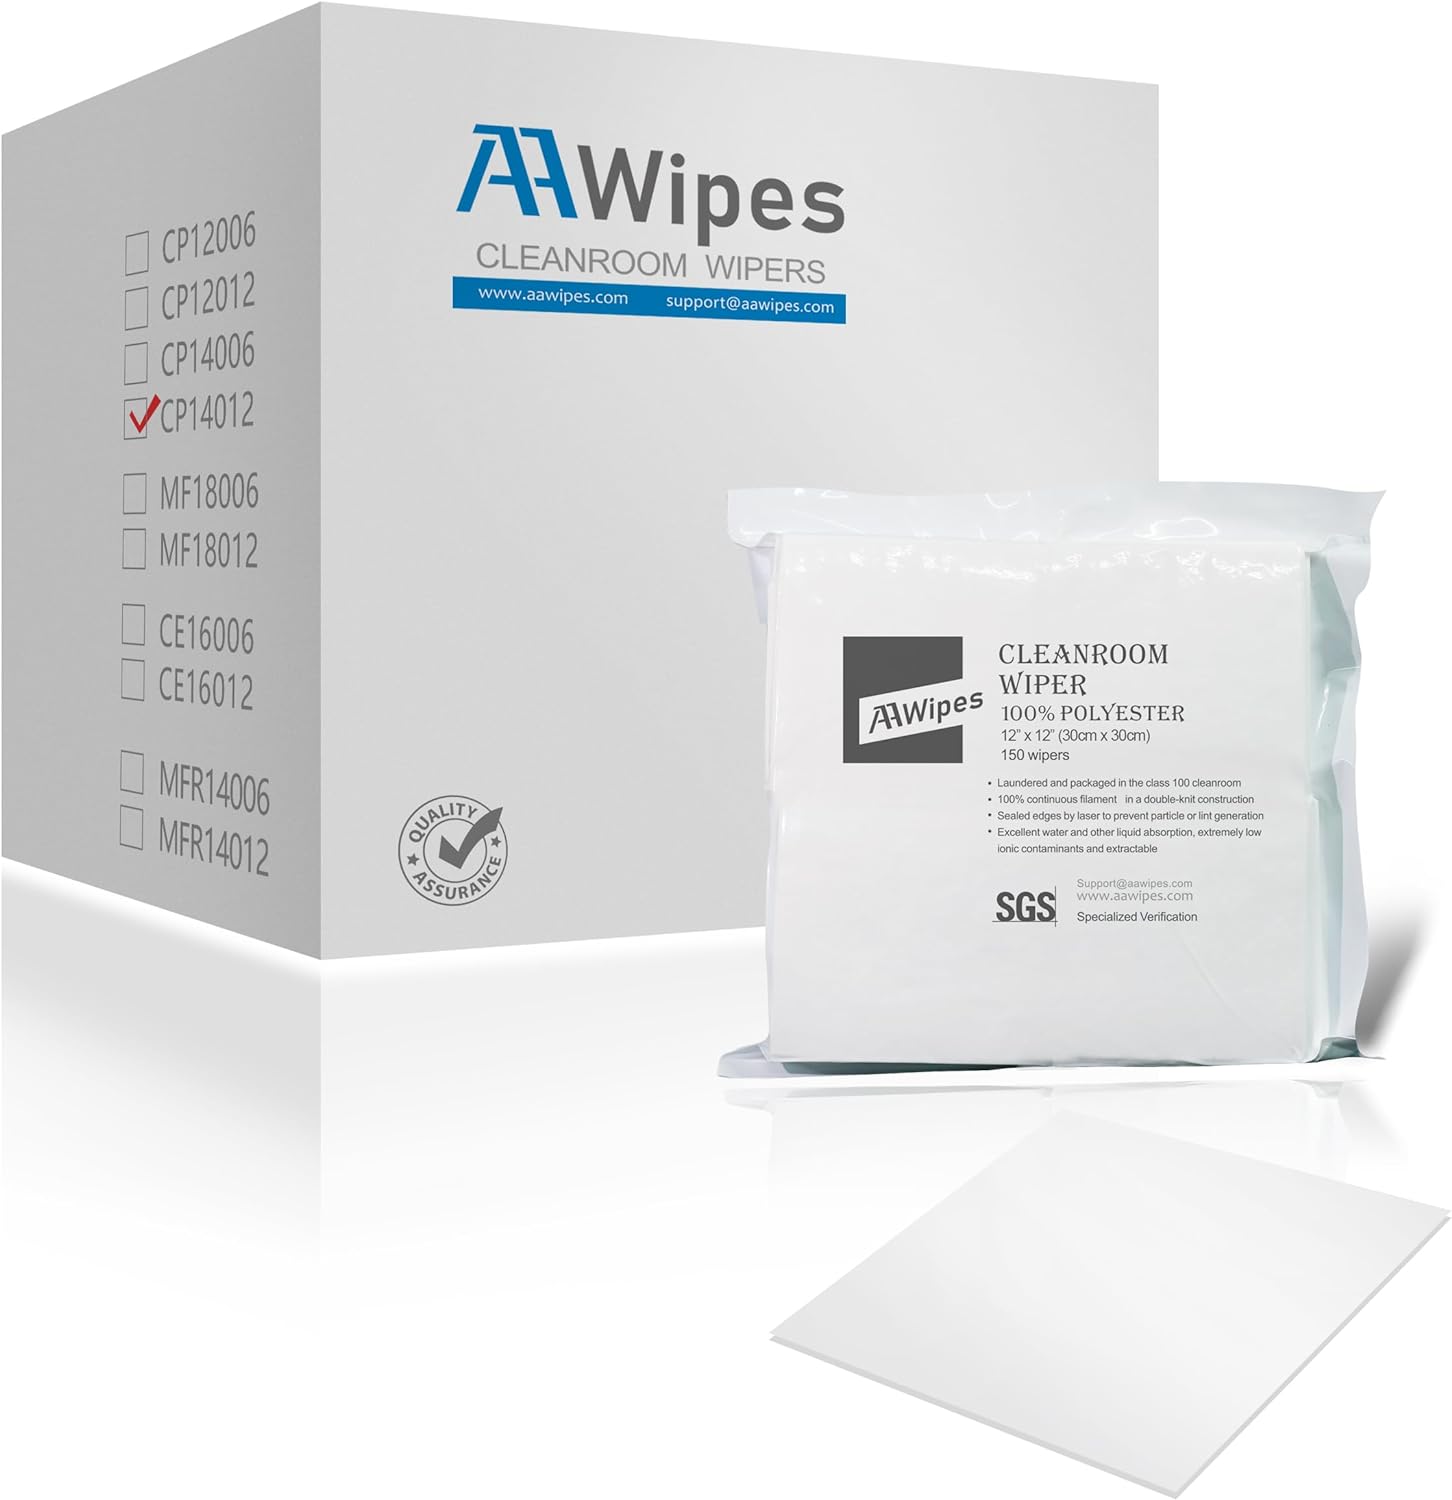 AAwipes cleanroom wipes constructed from high-strength polyester microfiber, these cleanroom cloths have laser-cut and ultrasonically sealed edges and are produced in a class 10-100 cleanroom. They are soft, non-abrasive, fast-drying, and feature a high-density weave that enhances absorption. The synthetic fibers are lint-free and durable.